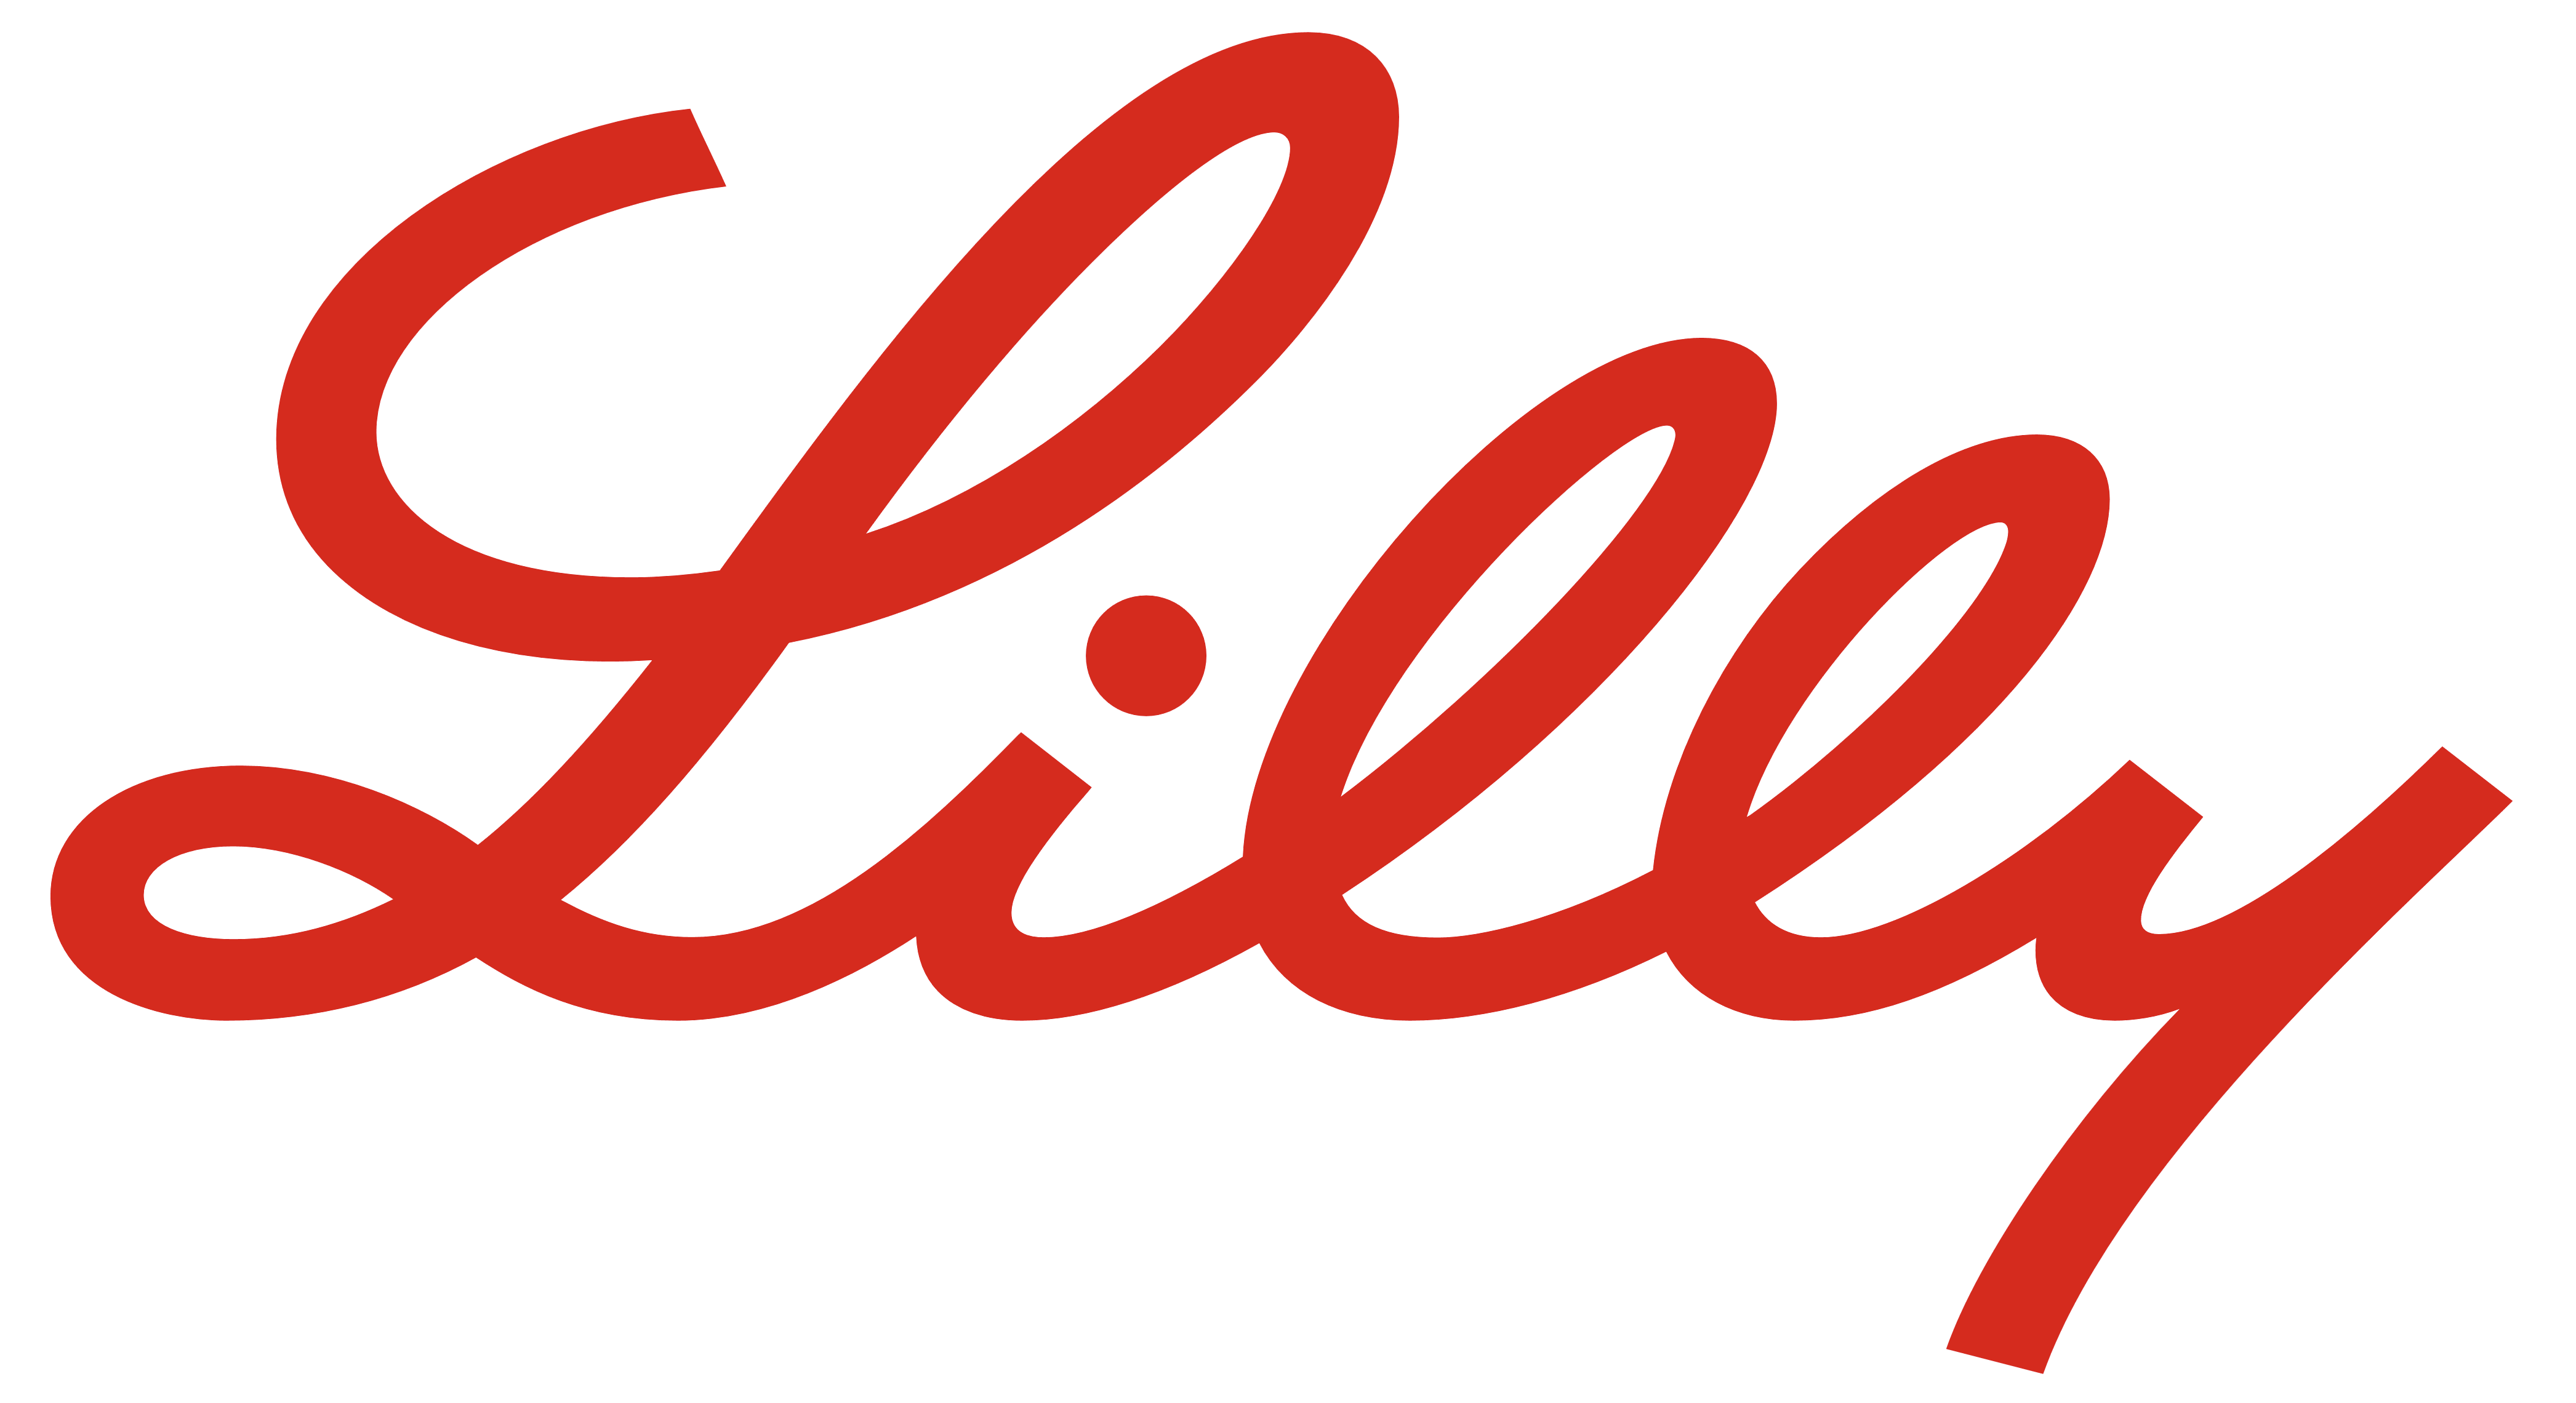 Lilly Logo - Lilly – Logos Download